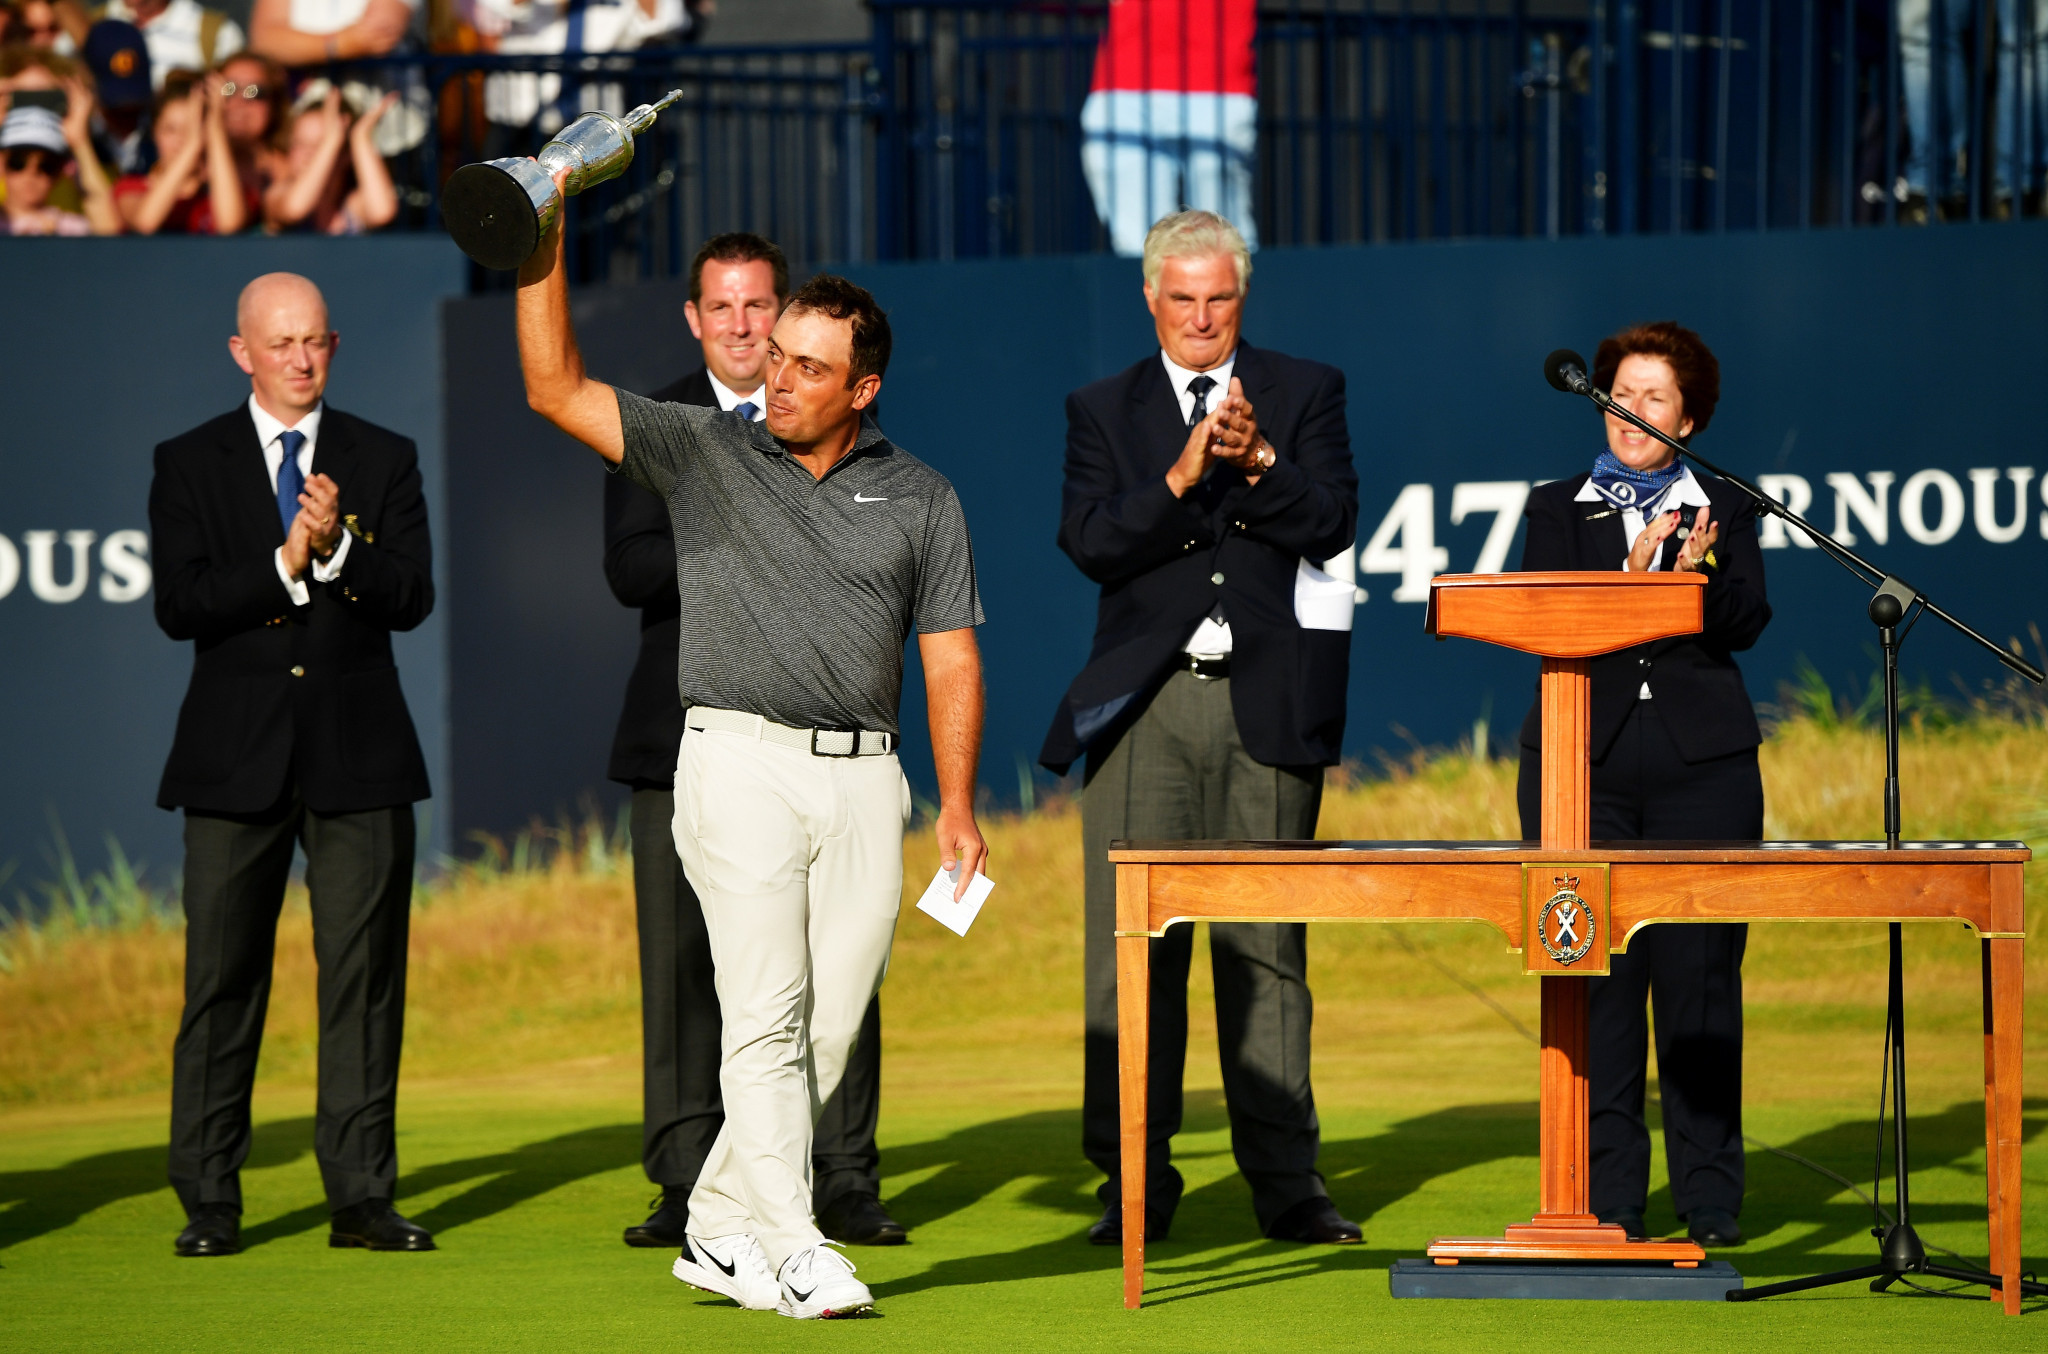 Molinari claims first major championship after emerging from pack to win The Open